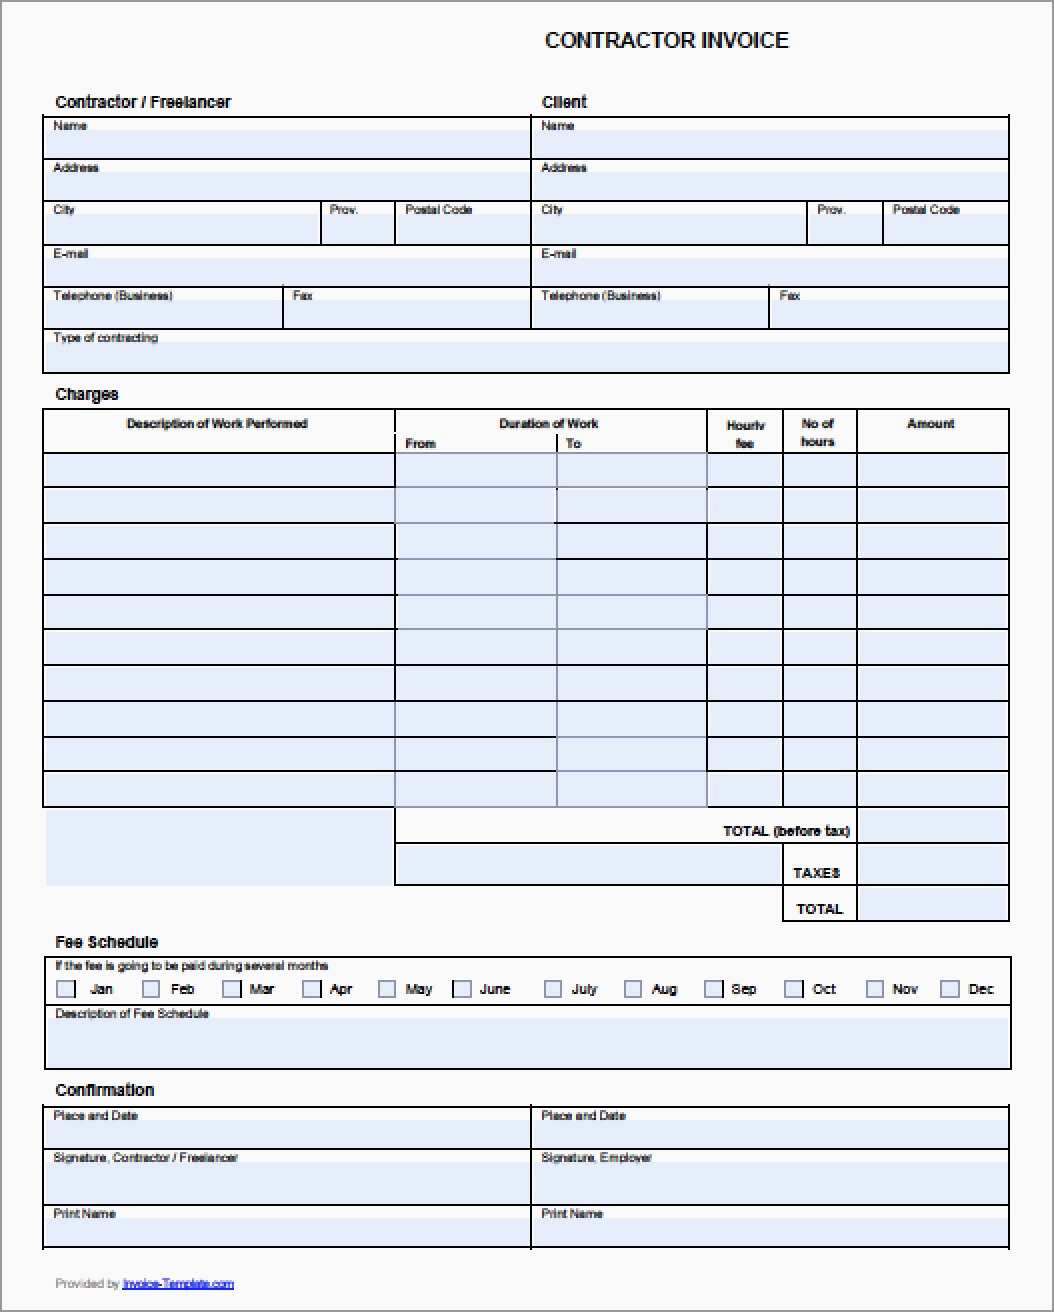 Invoice Examples Free Contractor Template Pdf Templates Throughout General Contractor Invoice Template